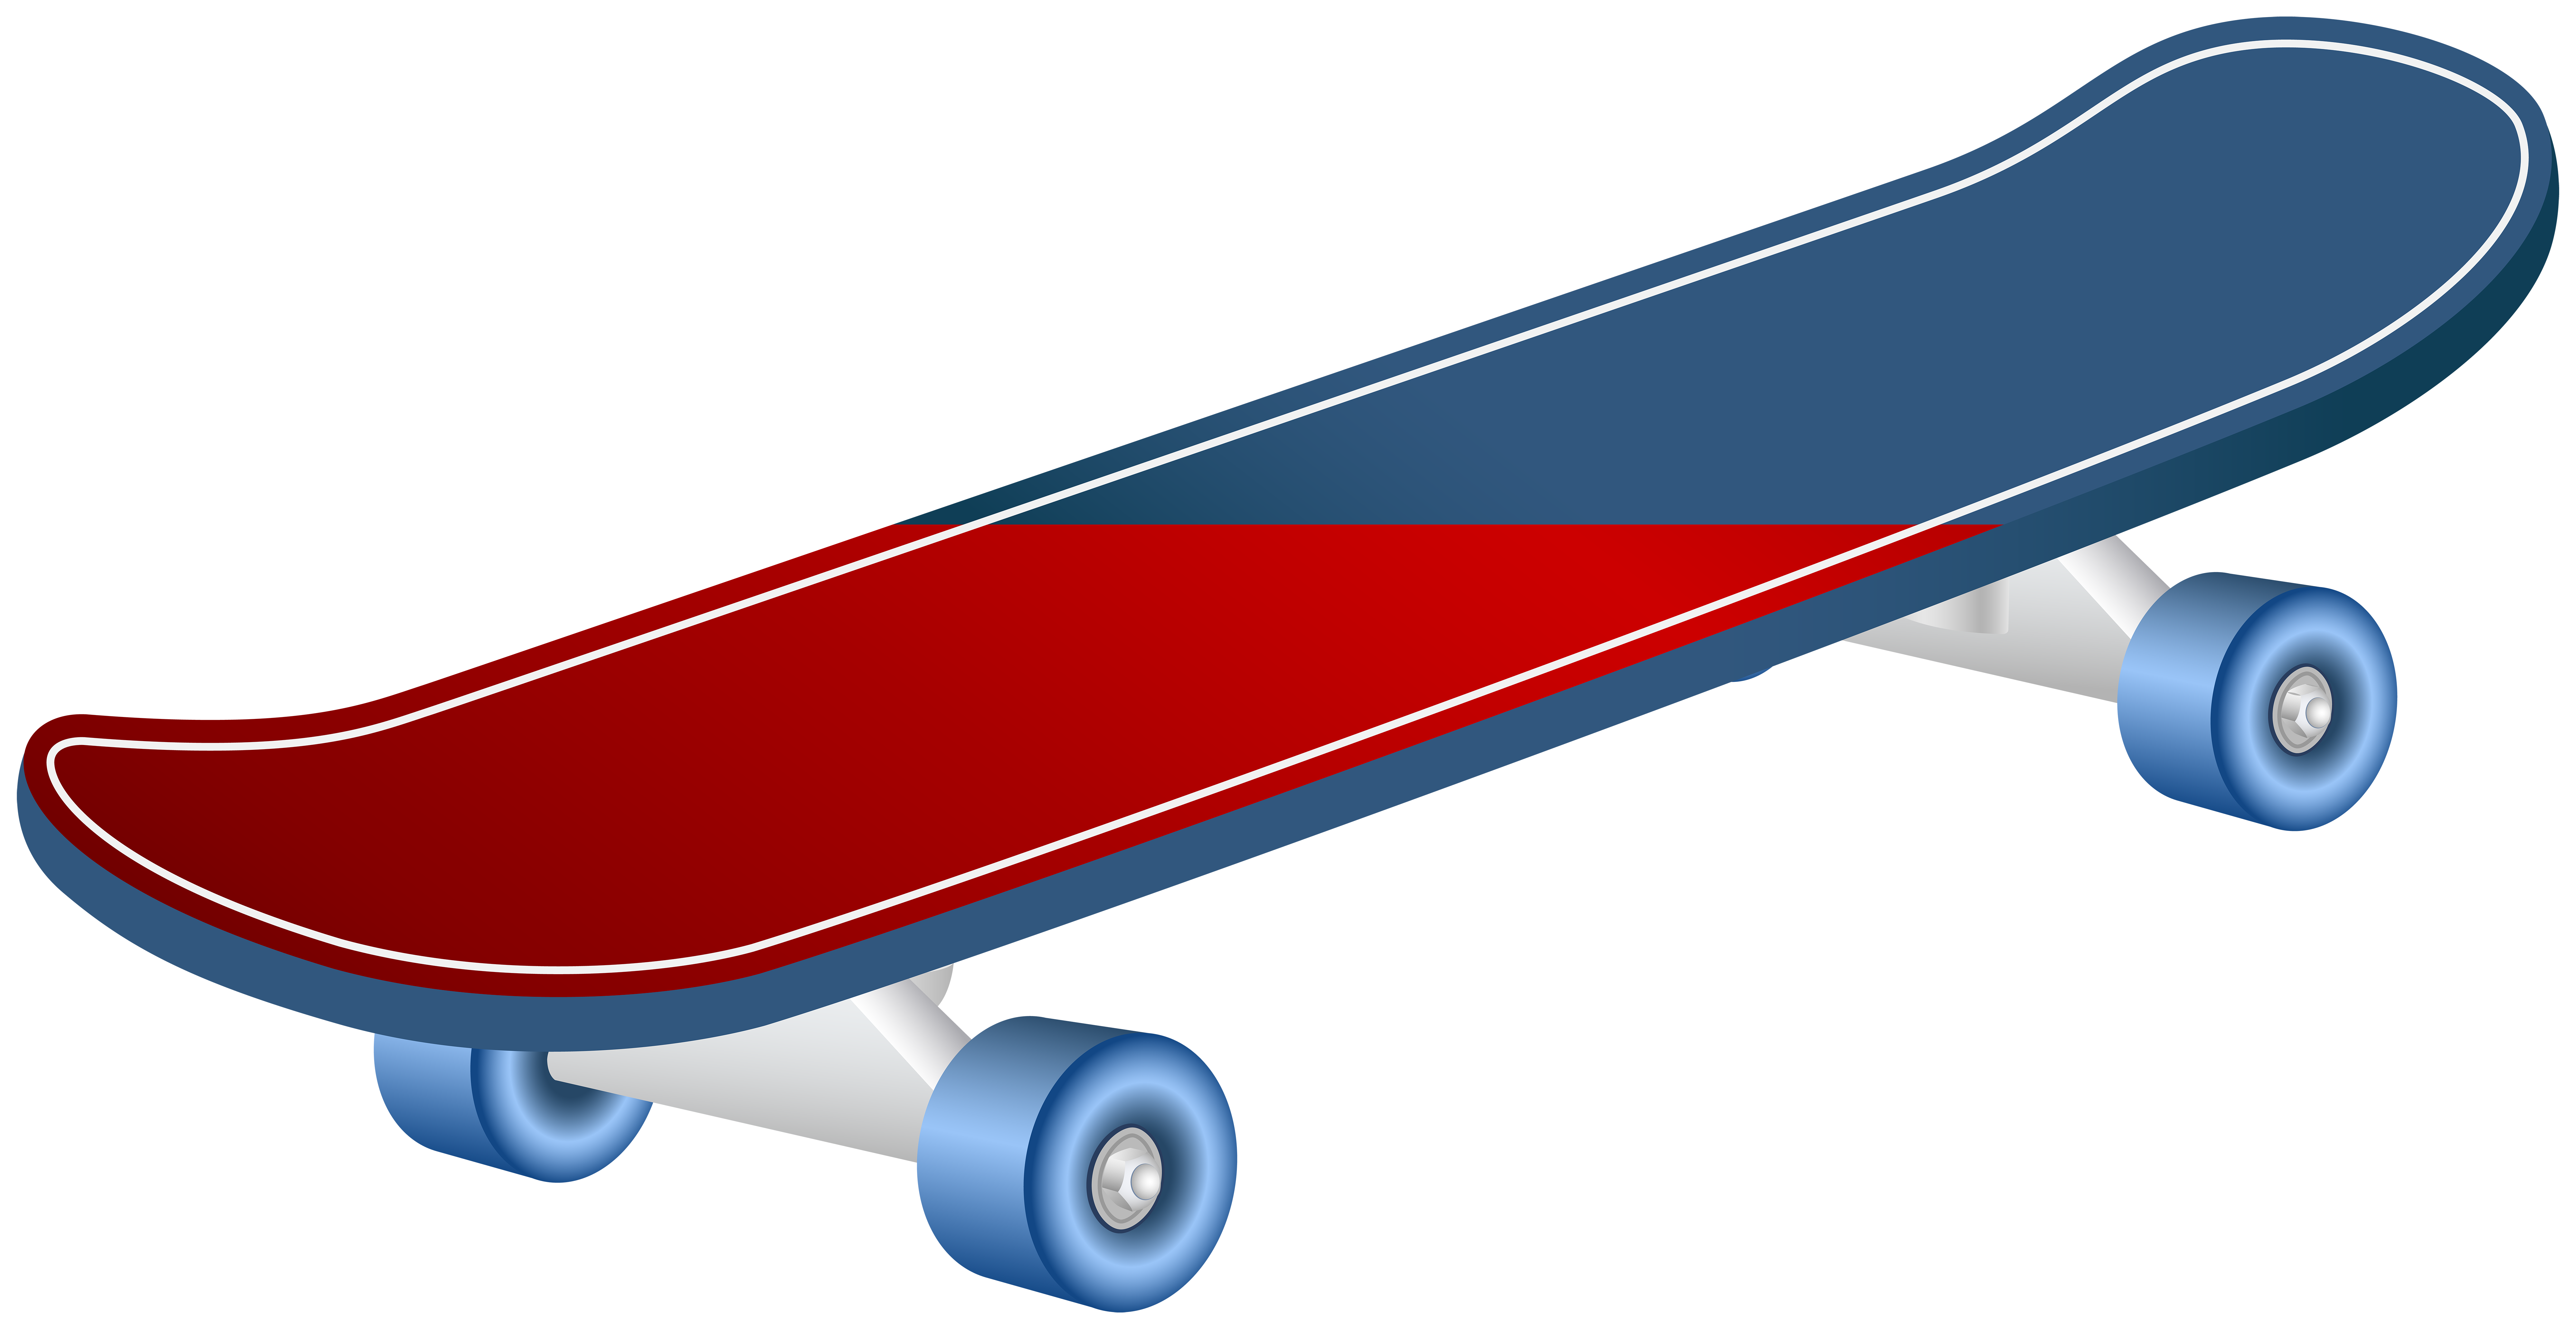 Skateboard Clipart Cute Download the perfect skateboarding pictures